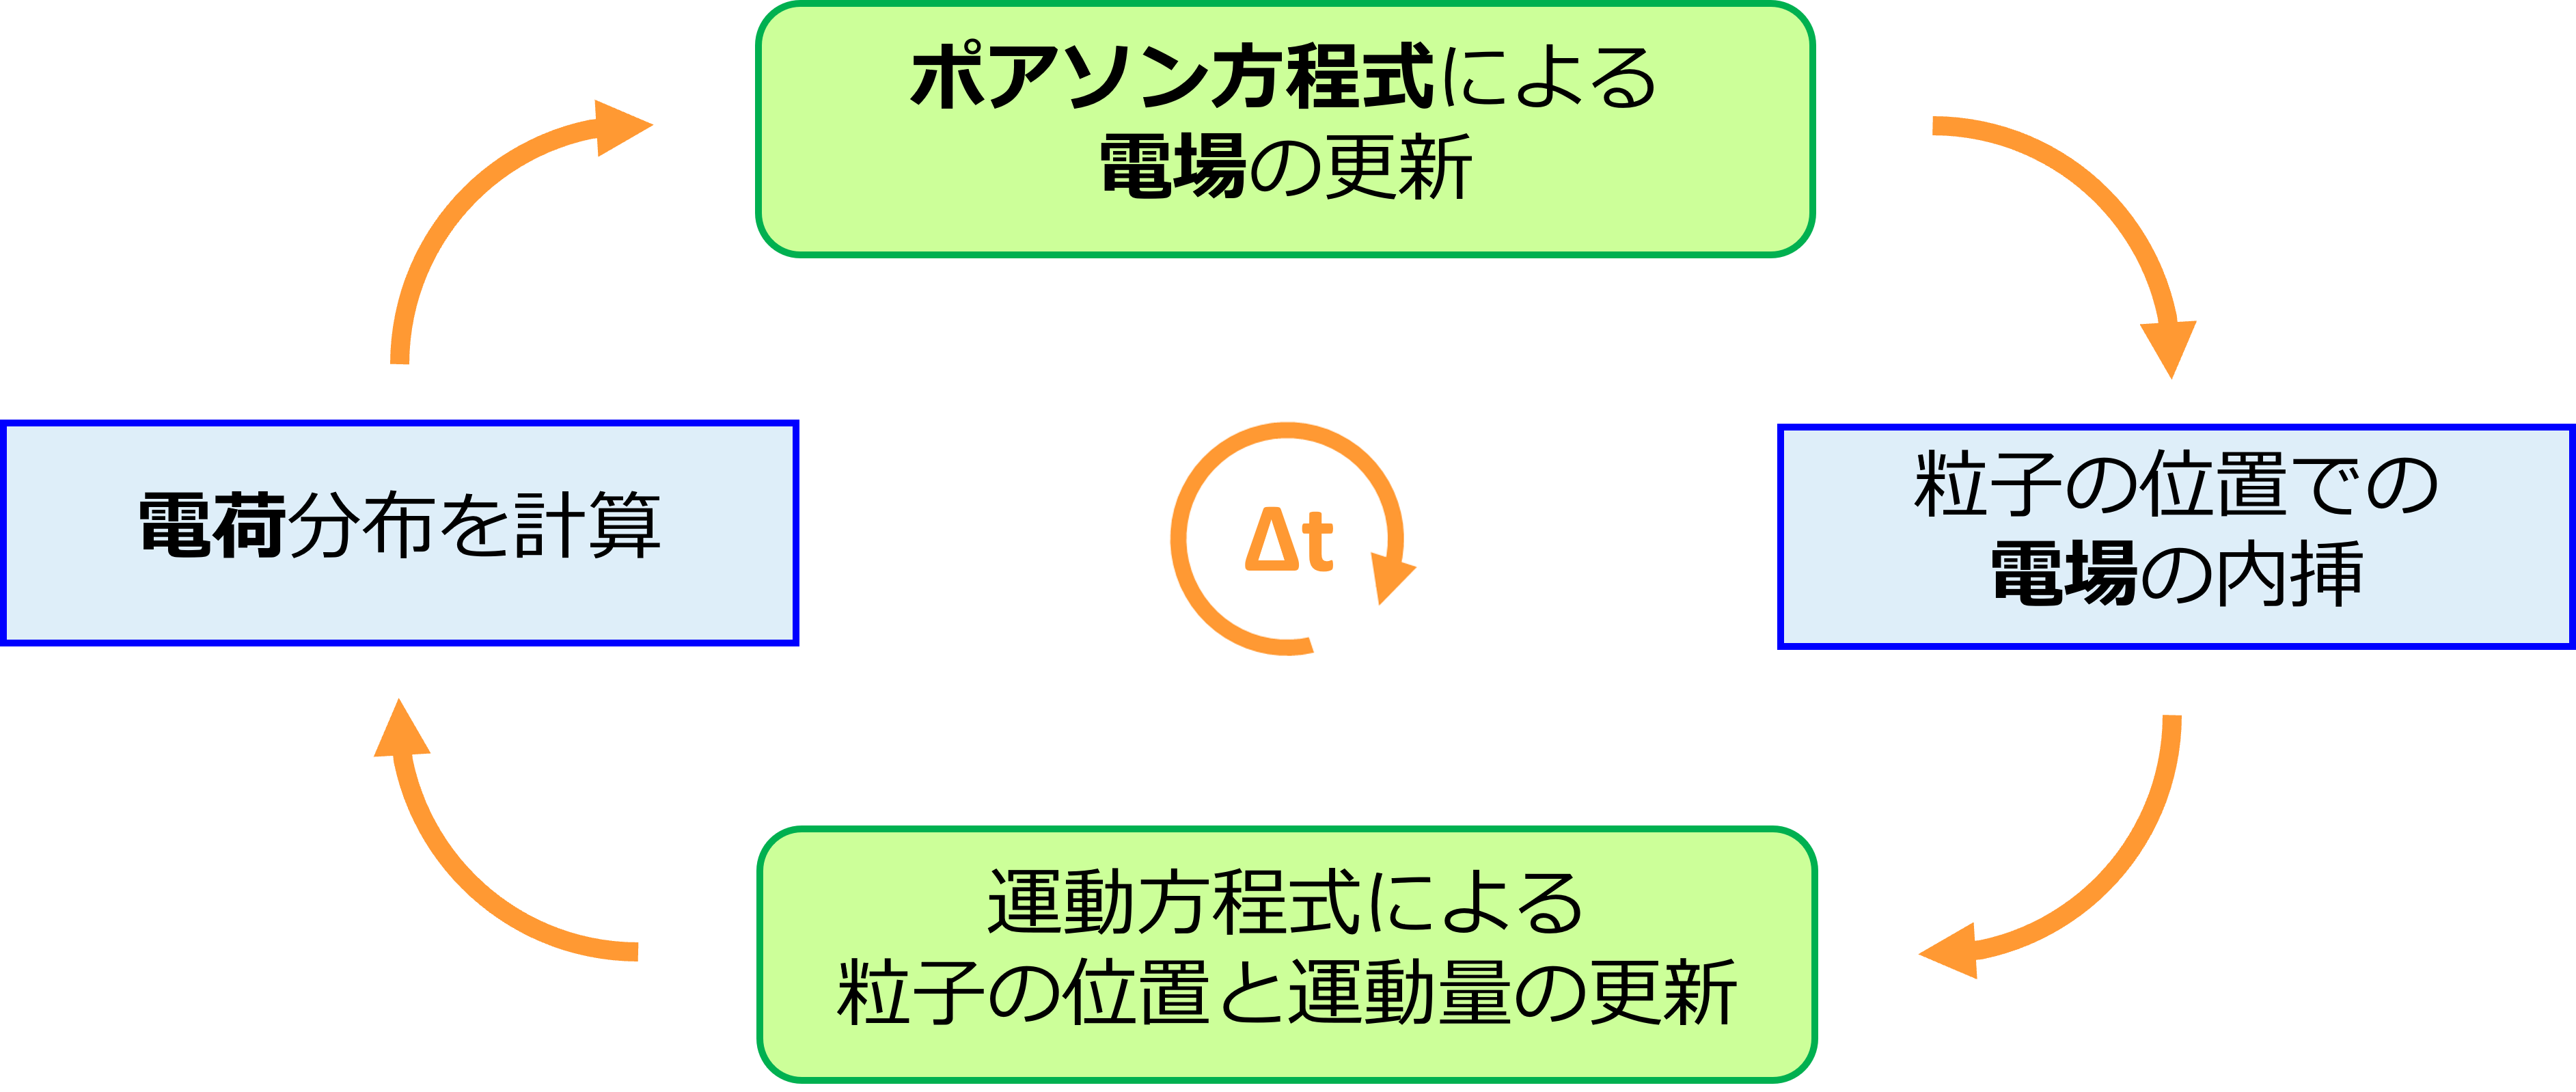 Es-PICソルバーのParticle in Cellアルゴリズム